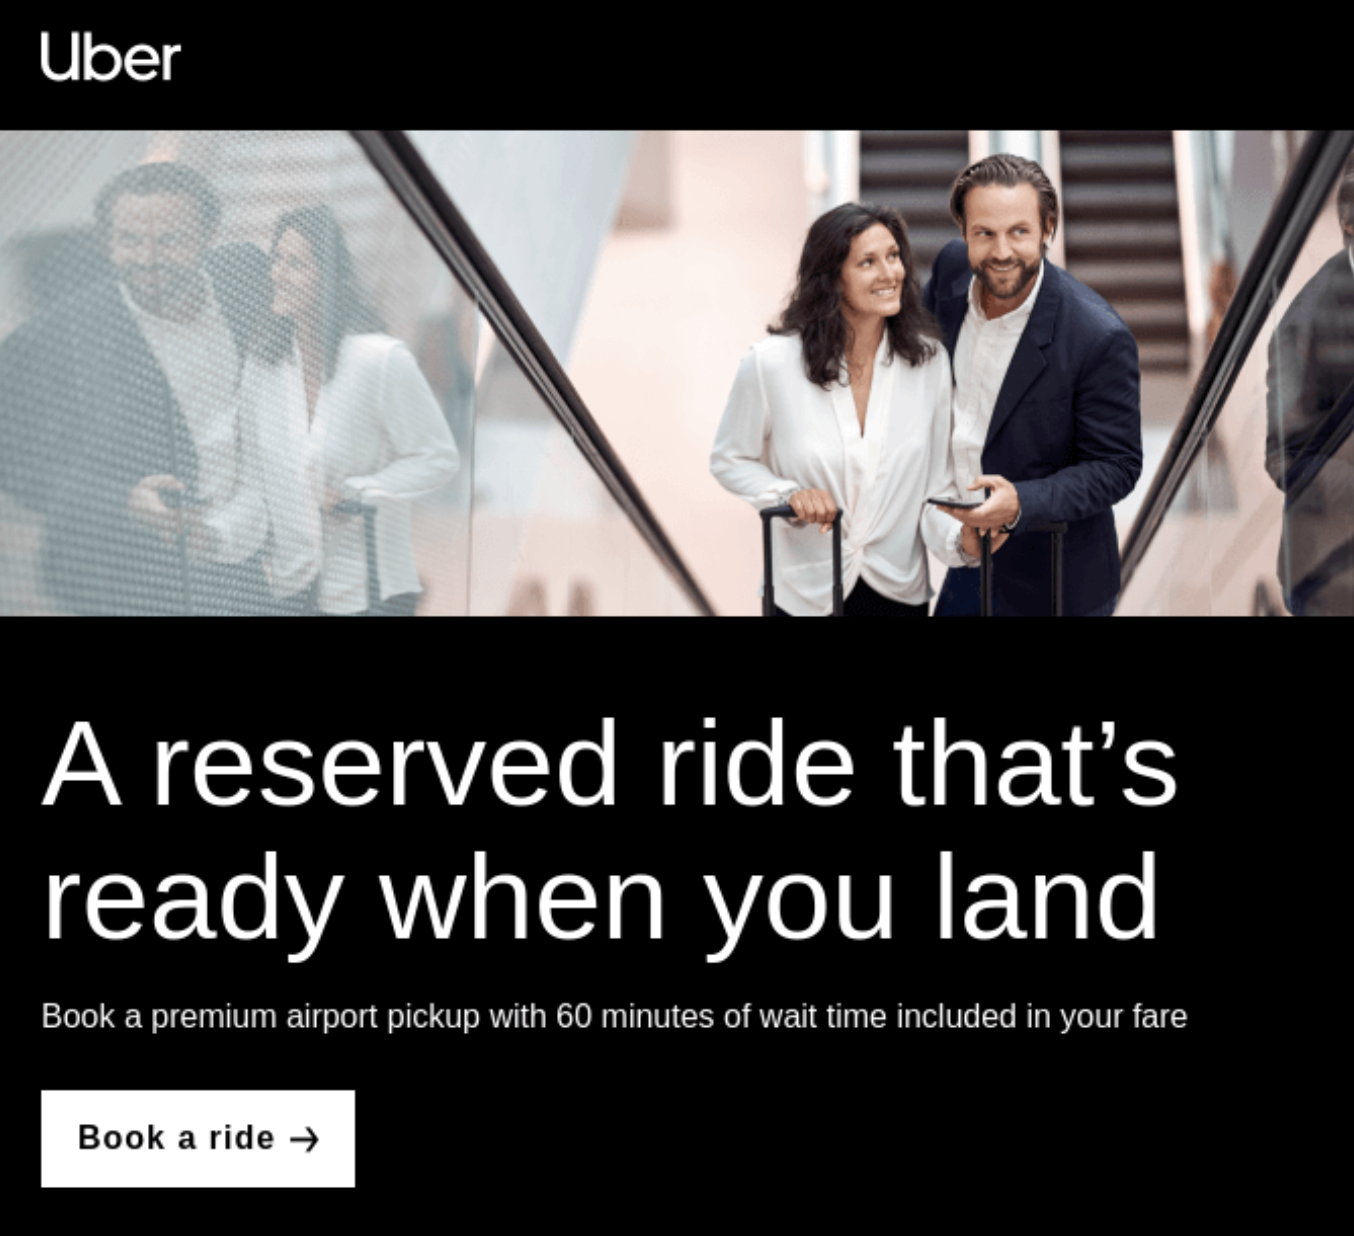 example of uber defining audience to increase website leads